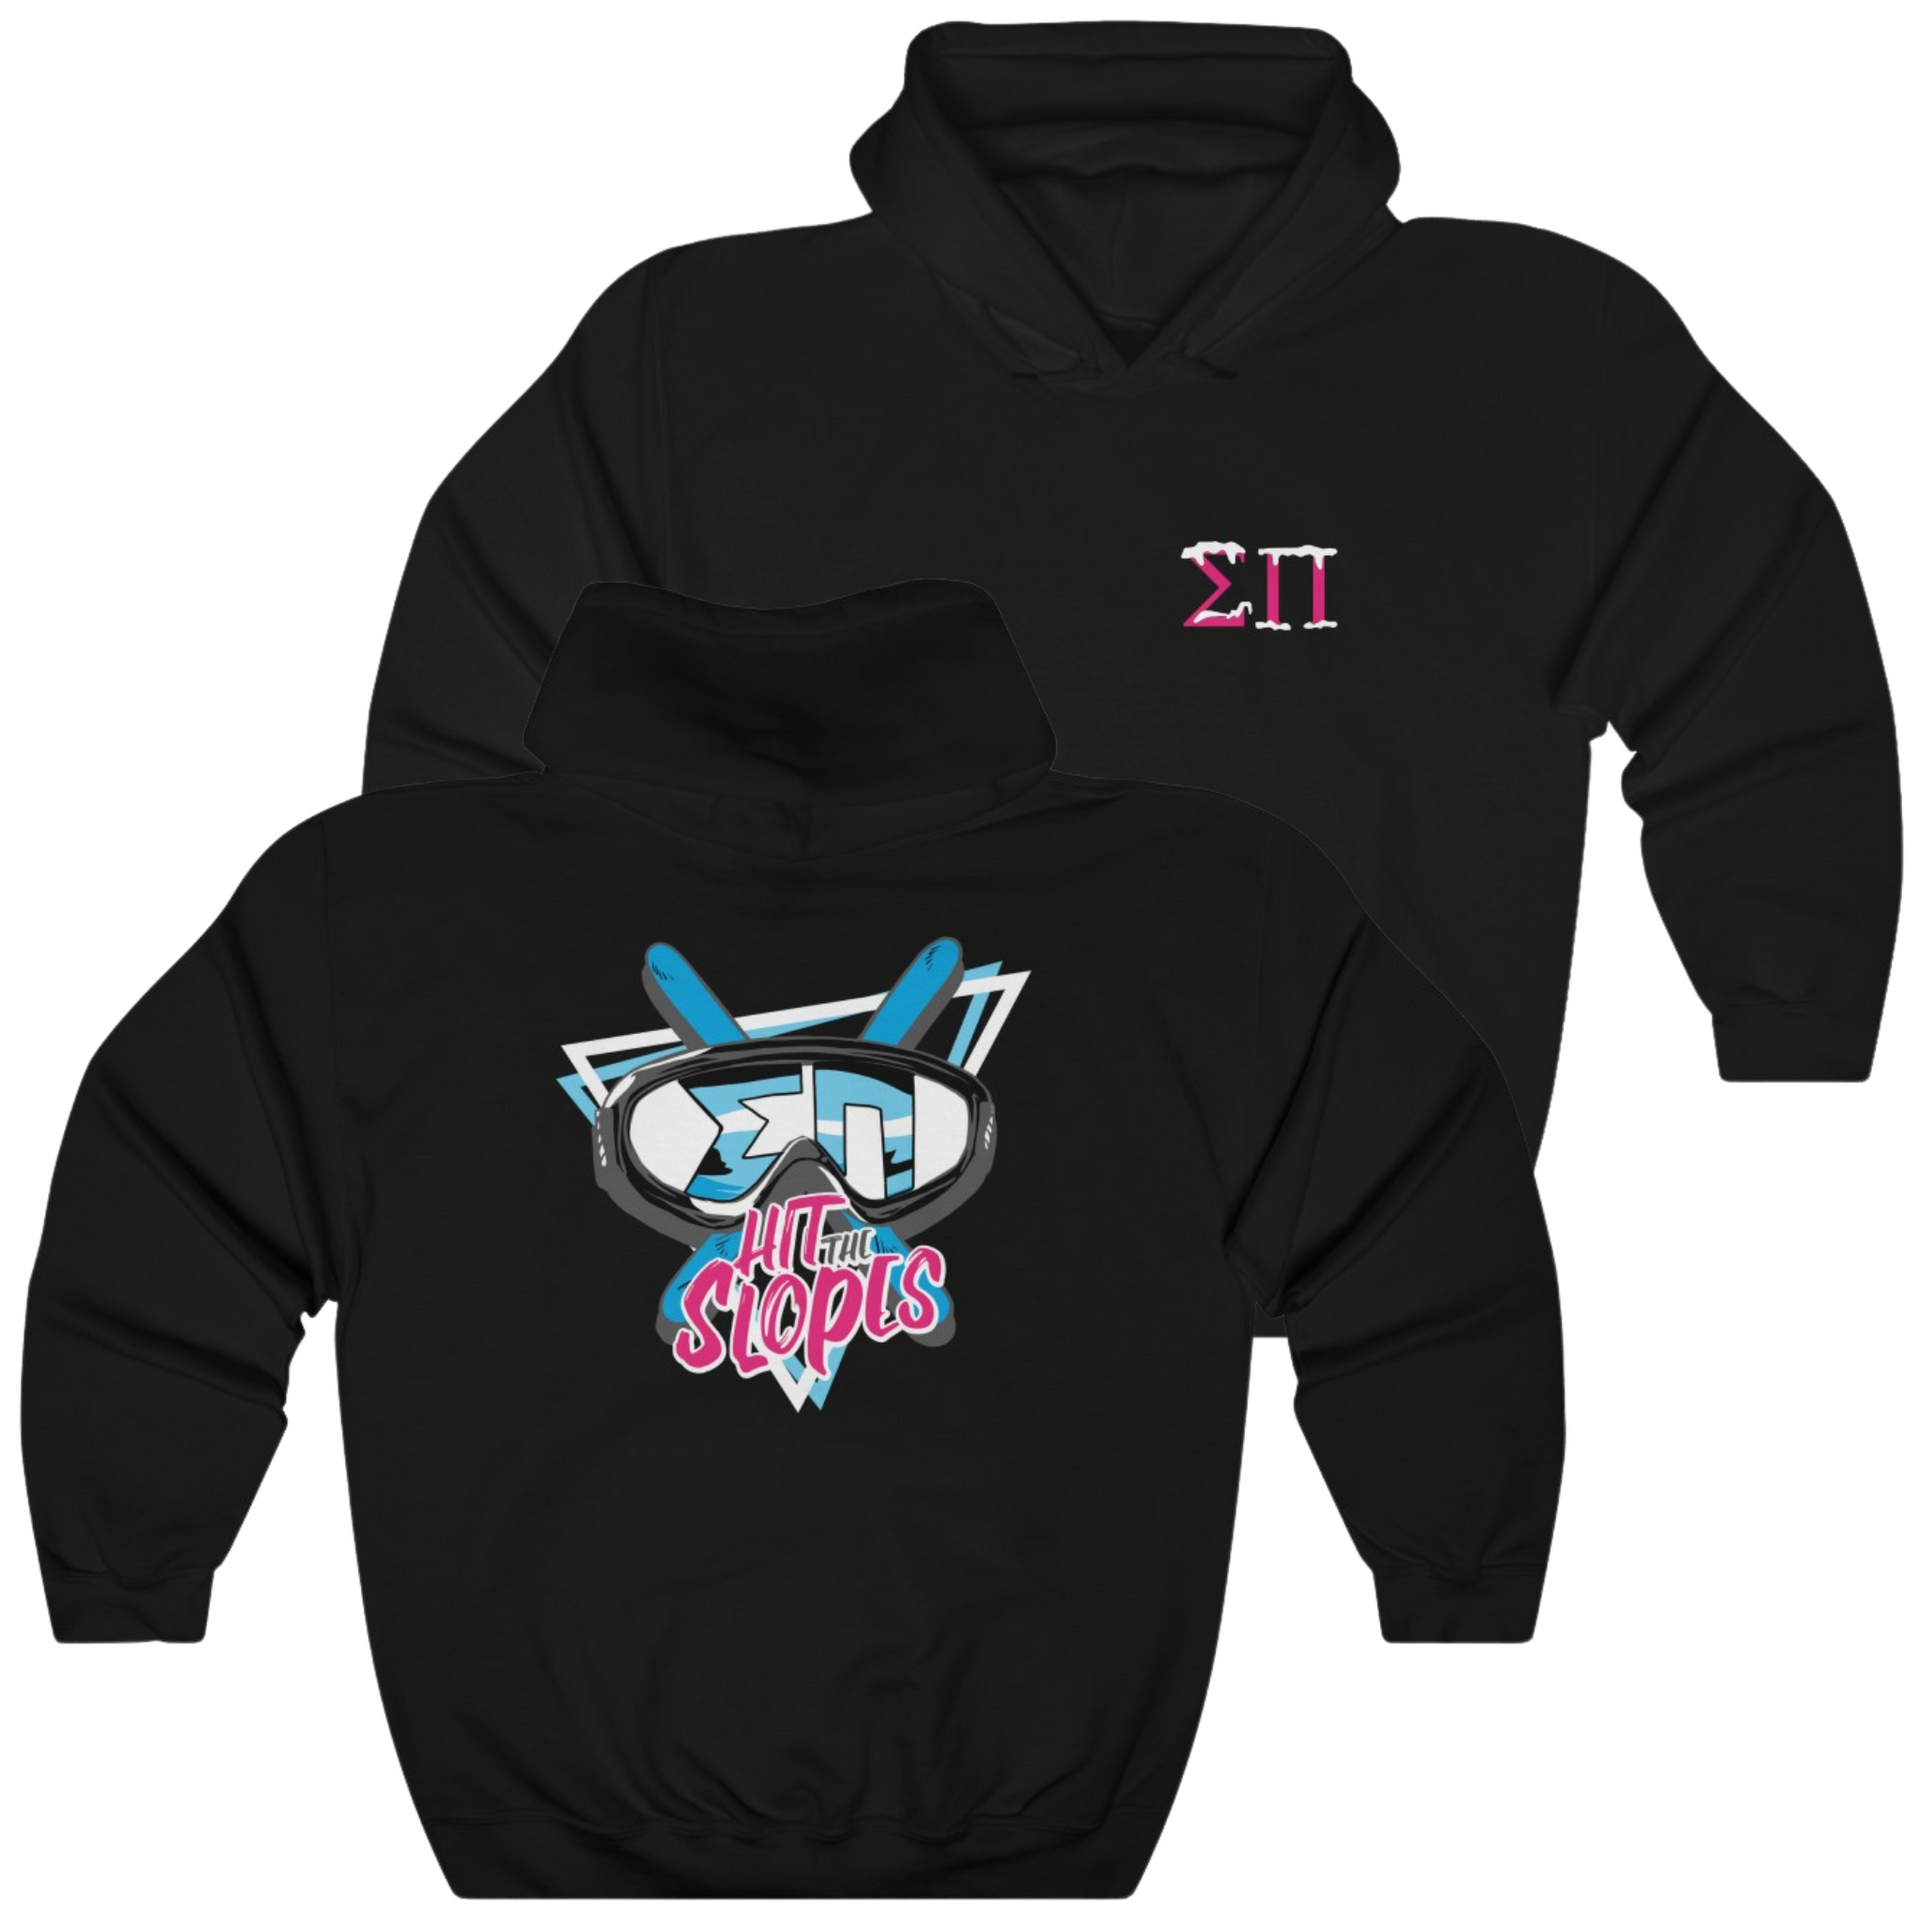 Black Sigma Pi Graphic Hoodie | Hit the Slopes | Sigma Pi Apparel and Merchandise 